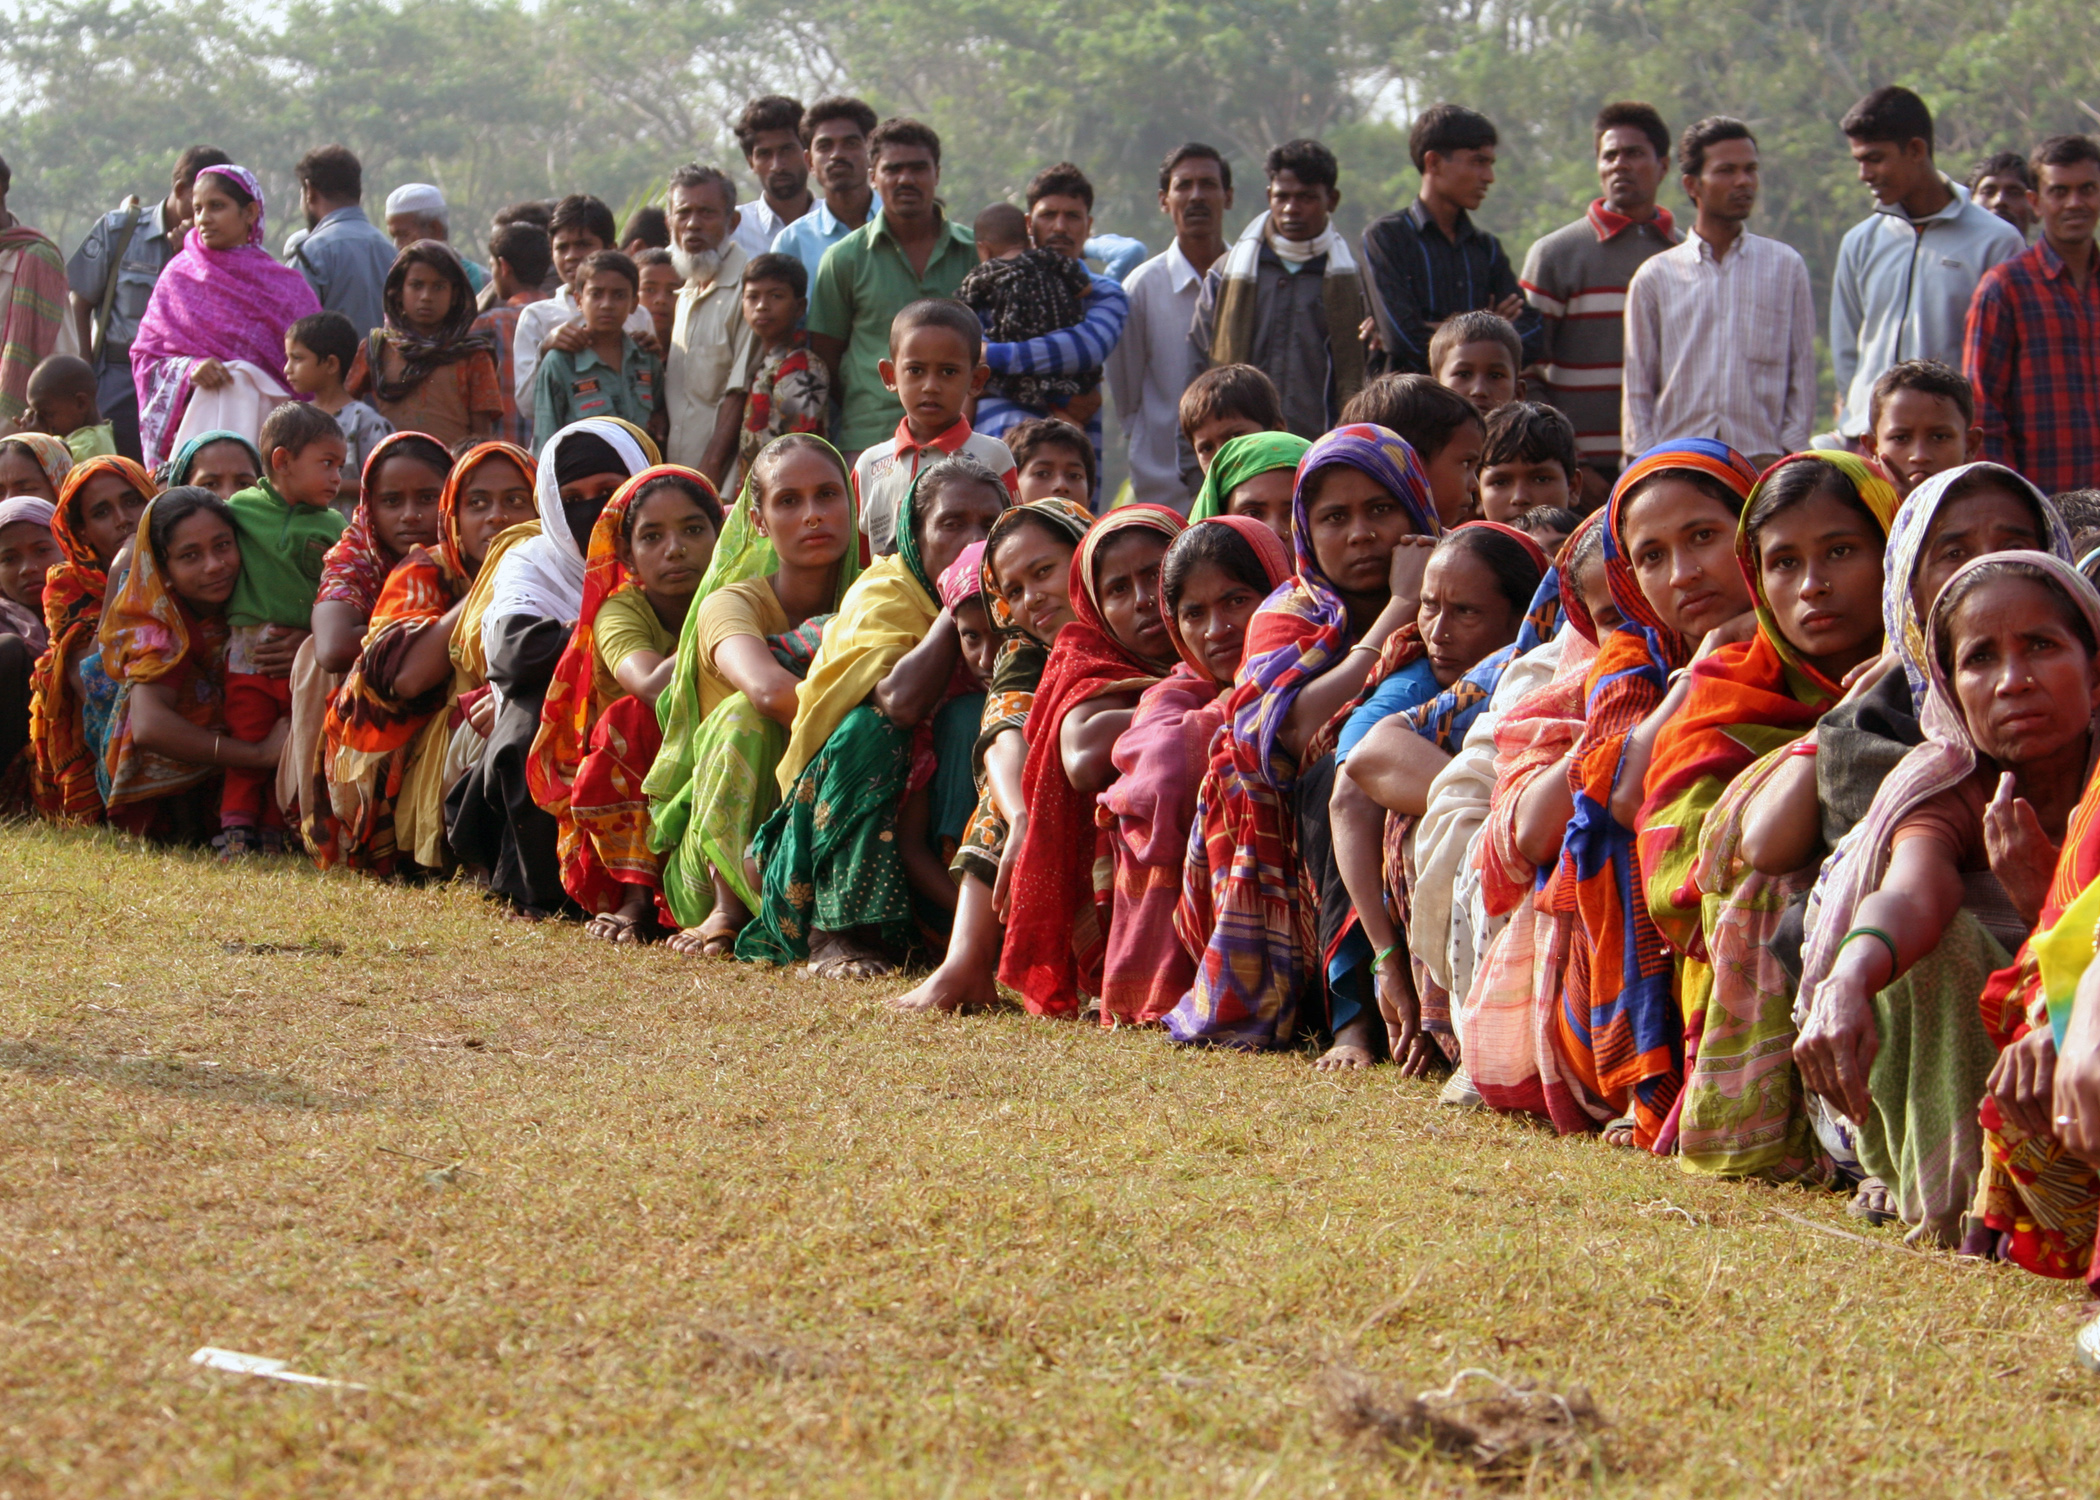 US Navy 071129-M-3095K-009 People gather on a field at Rangabali College in southern Bangladesh to receive medical attention from a U.S. Navy medical team in the wake of Tropical Cyclone Sidr